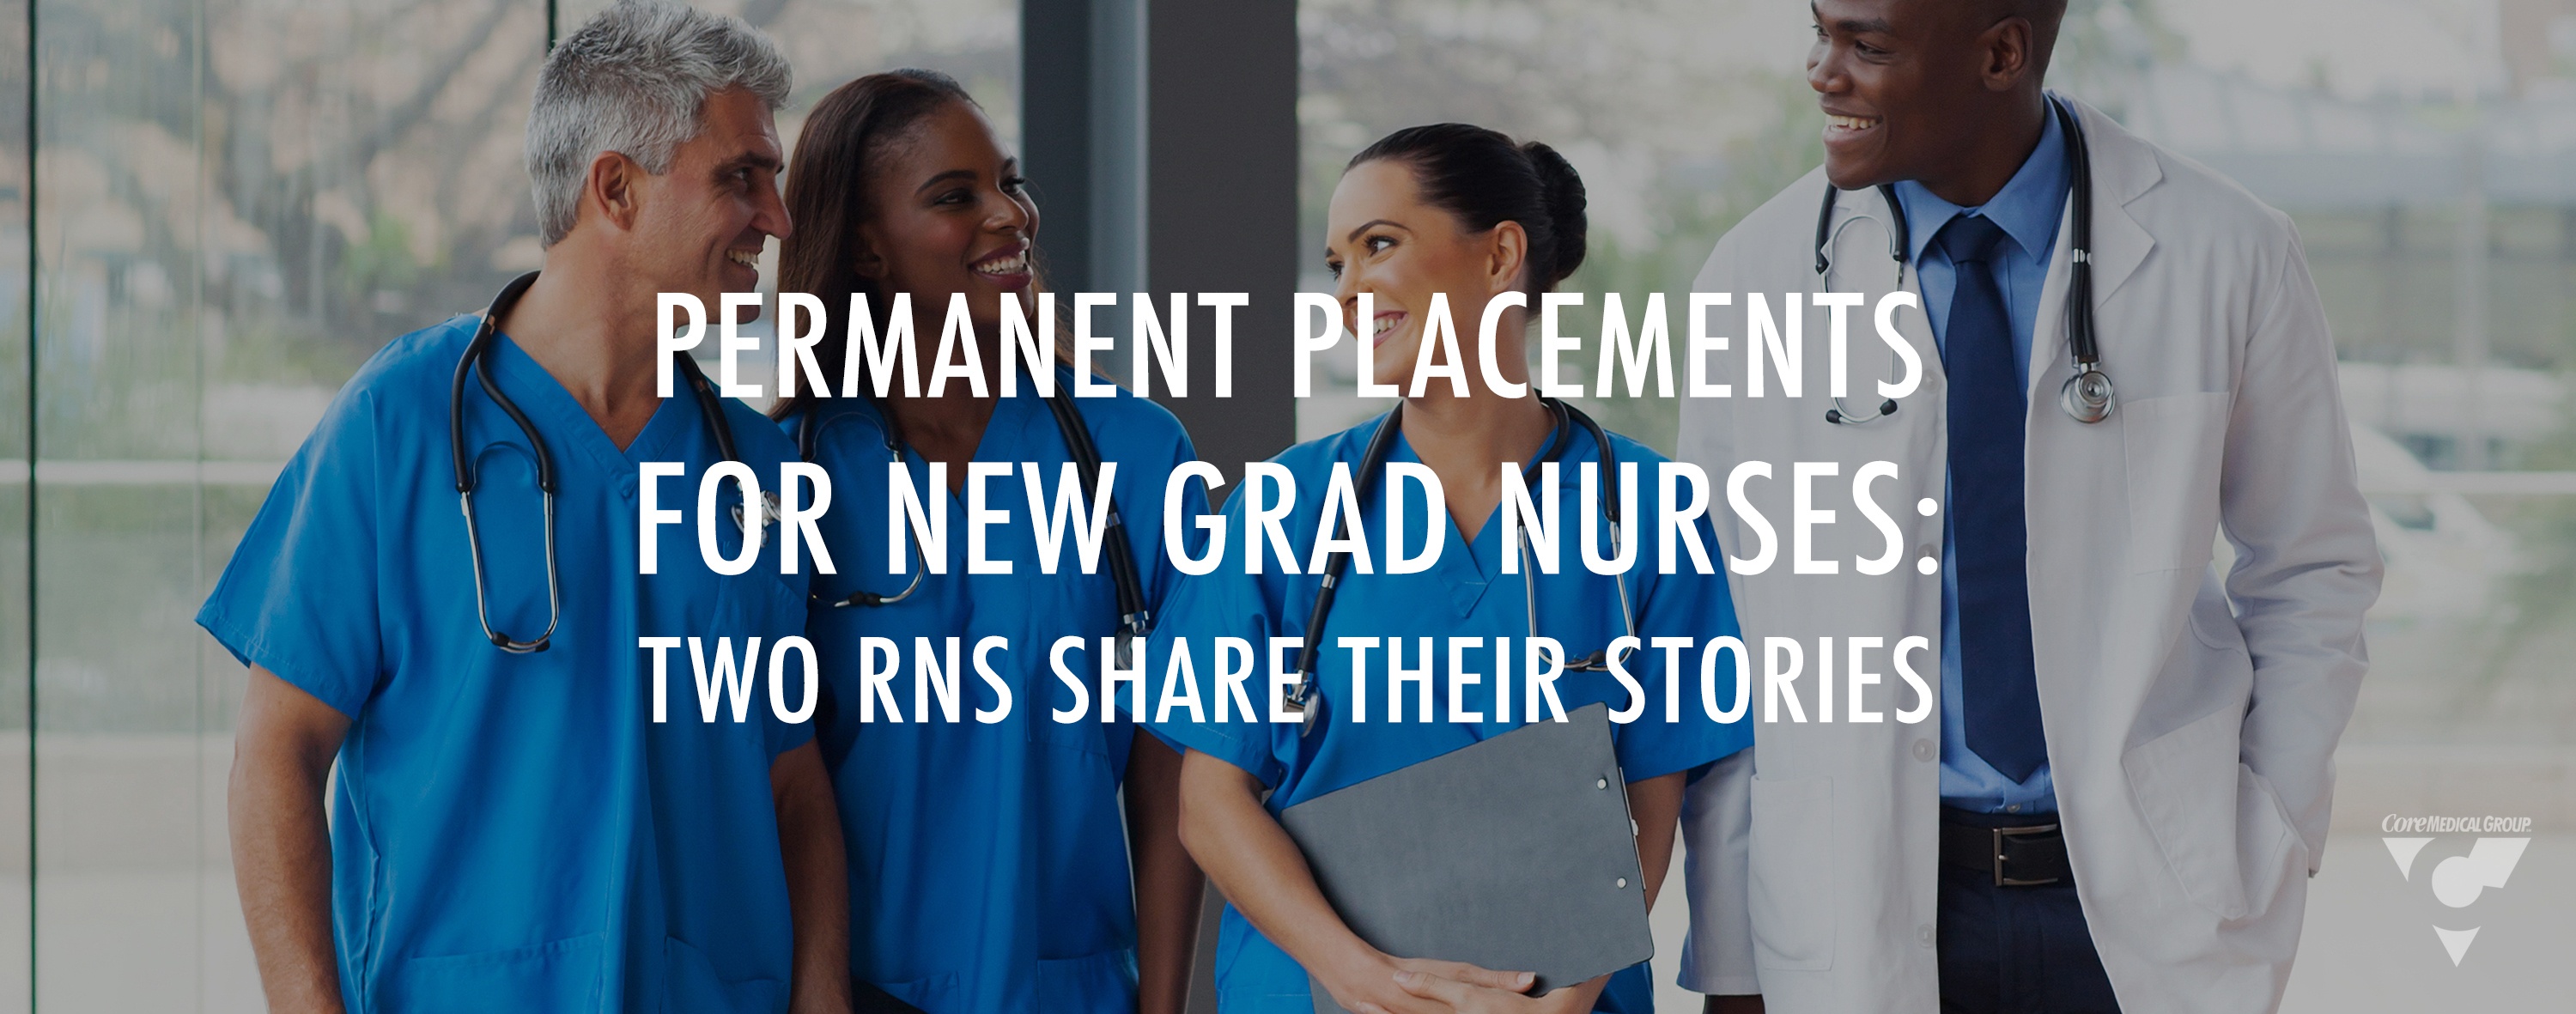 CMG_Blog_Permanet_Placement_For_New_Grad_Nurses